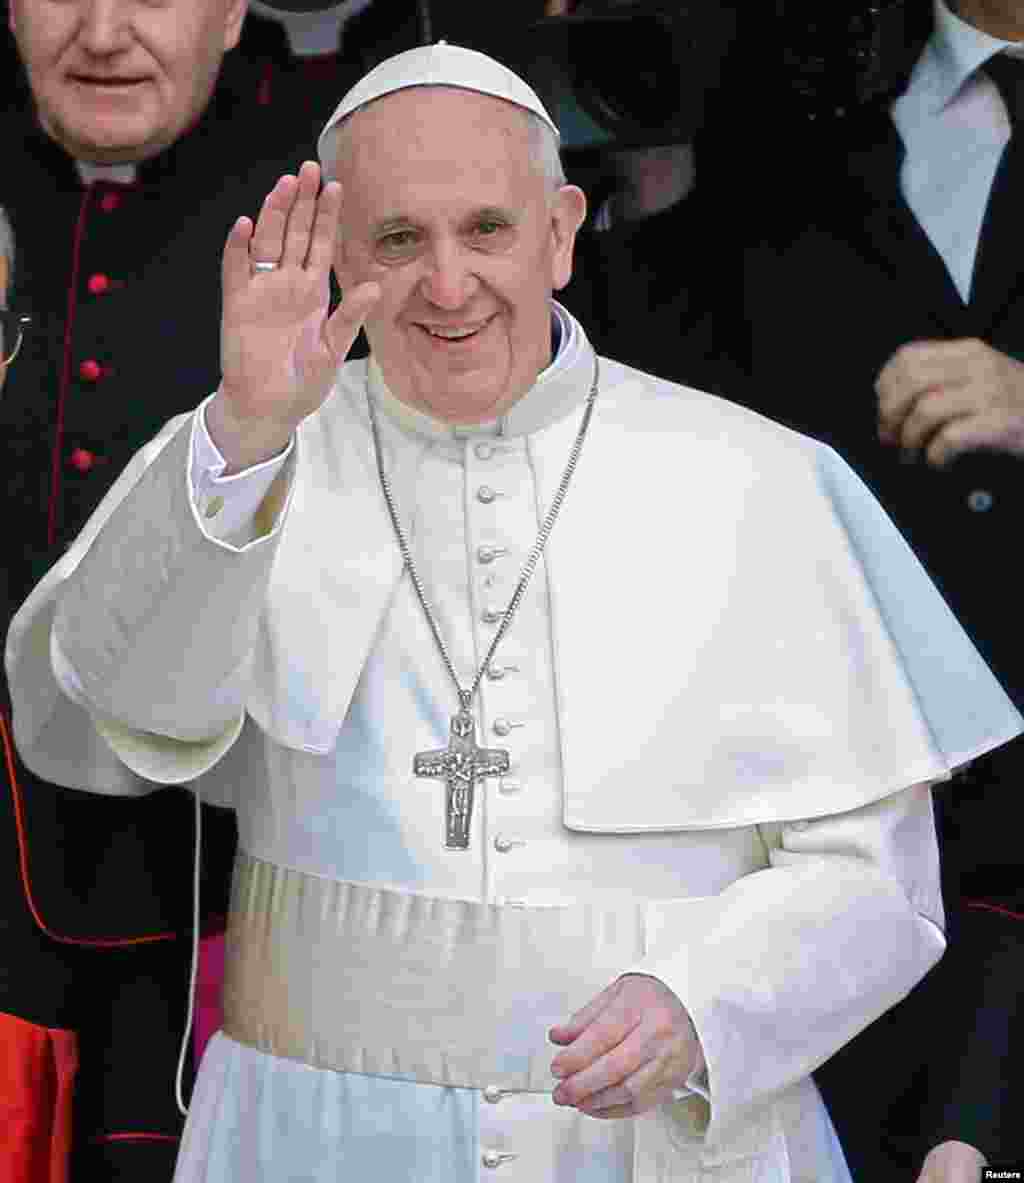 Newly elected Pope Francis, Cardinal Jorge Mario Bergoglio of Argentina, waves as he leaves the Santa Maria Maggiore Basilica in Rome, Italy.